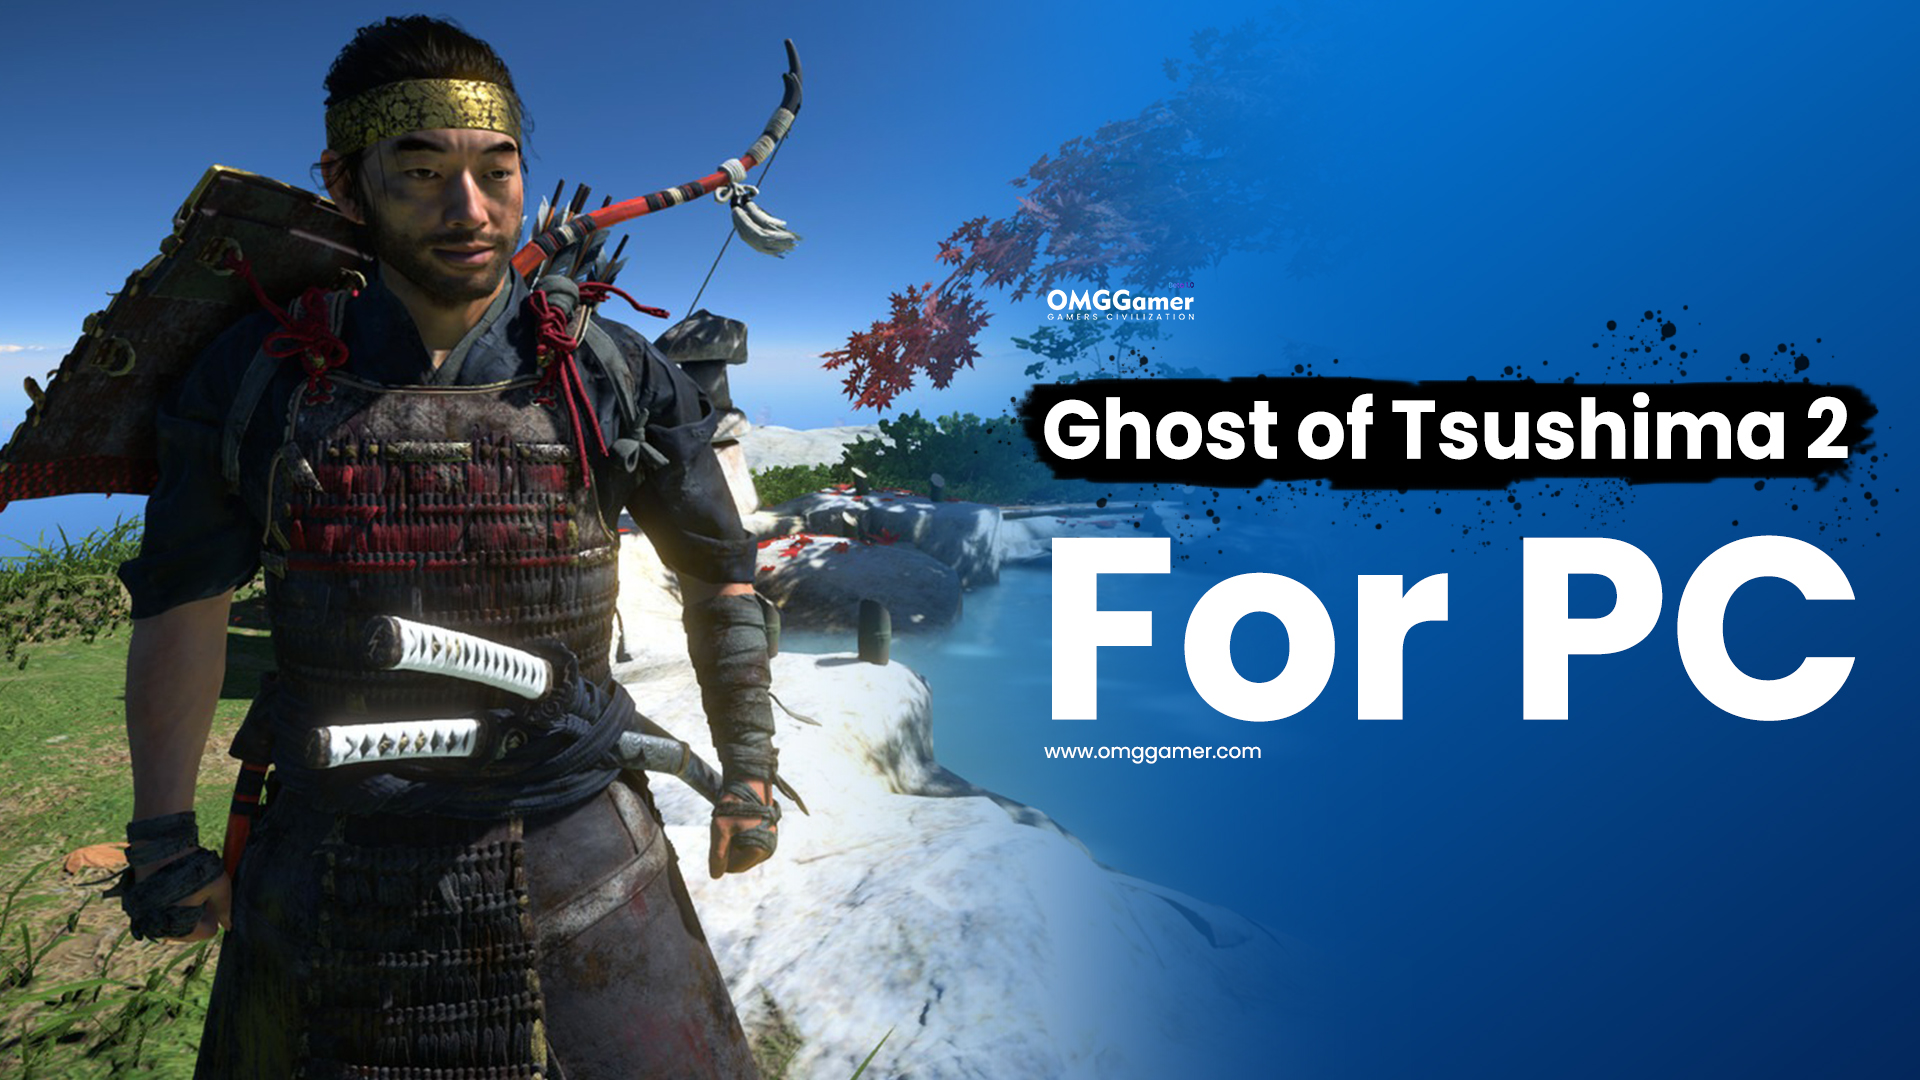 Ghost of Tsushima 2 for PC